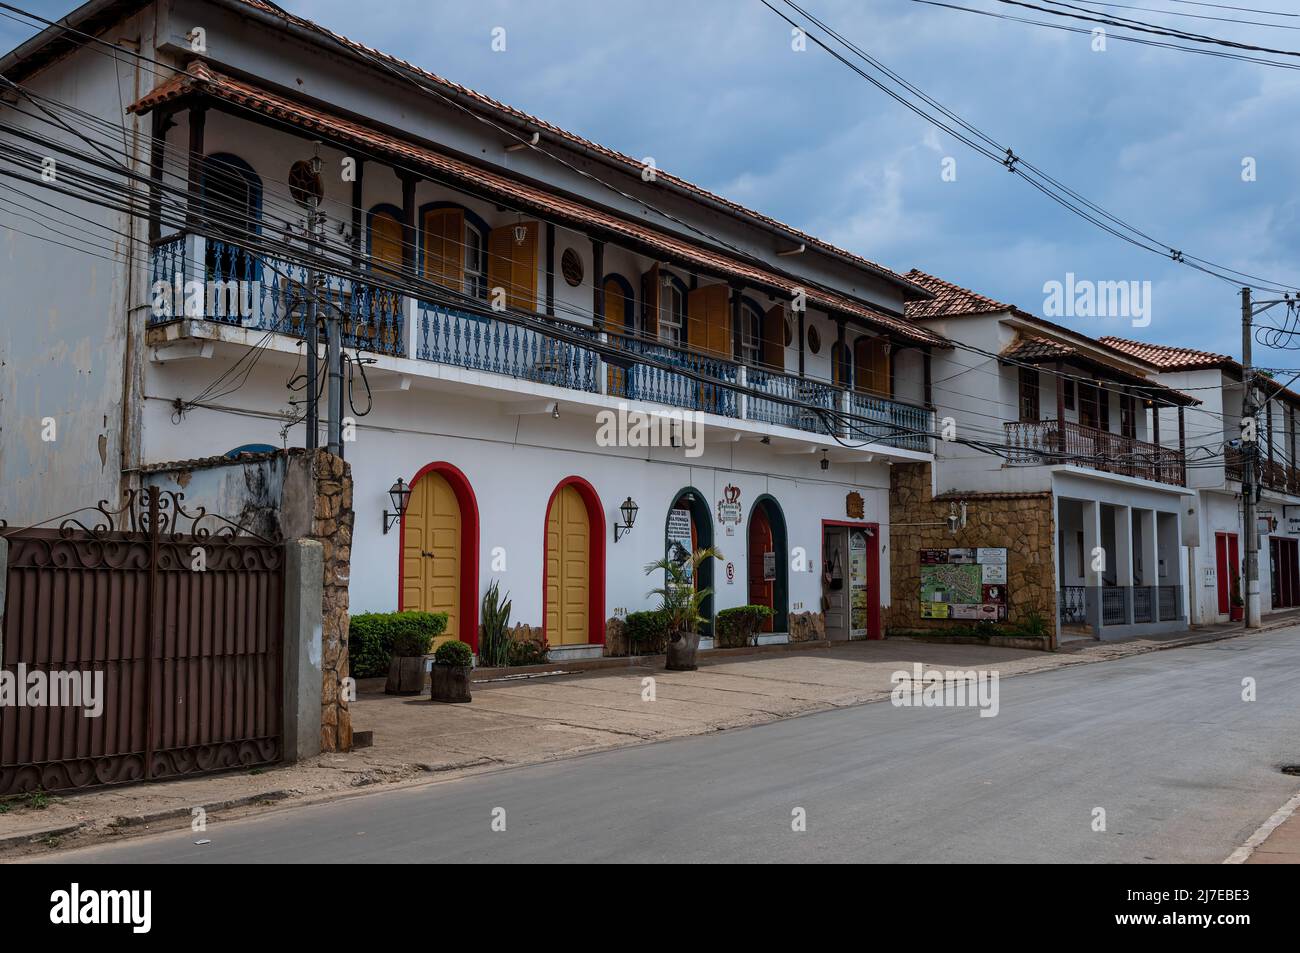 Many small business running in a big colonial building at Inconfidentes street, nearby Tiradentes historical center and under heavy clouded sky. Stock Photo